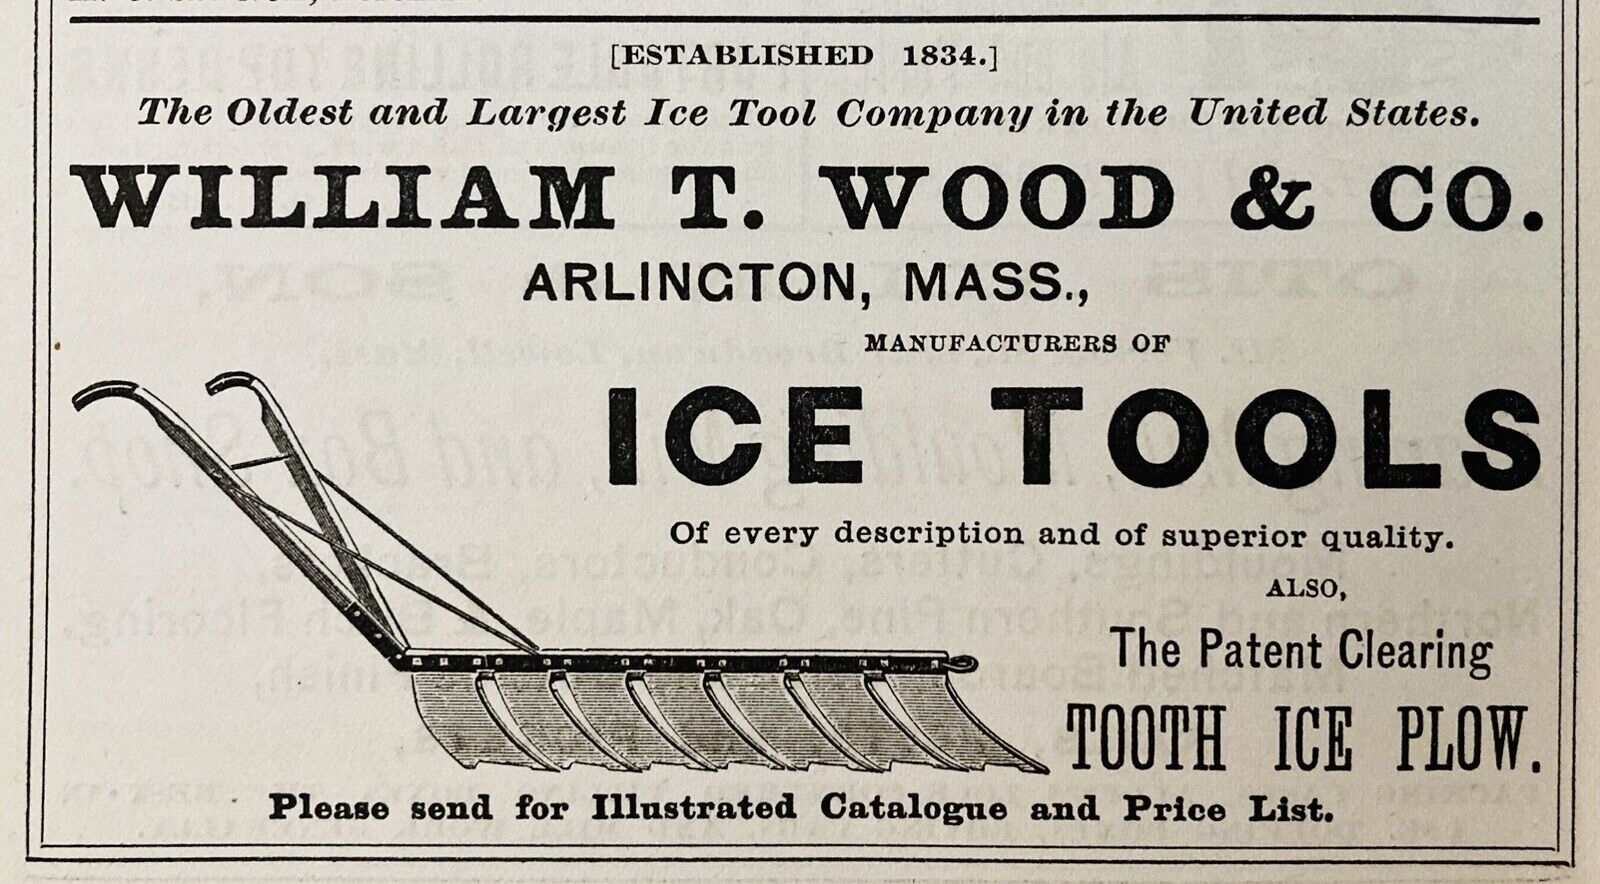 1883 AD(N18)~WILLIAM T. WOOD CO. ARLINGTON, MASS. OLDEST ICE TOOL CO. IN U.S.